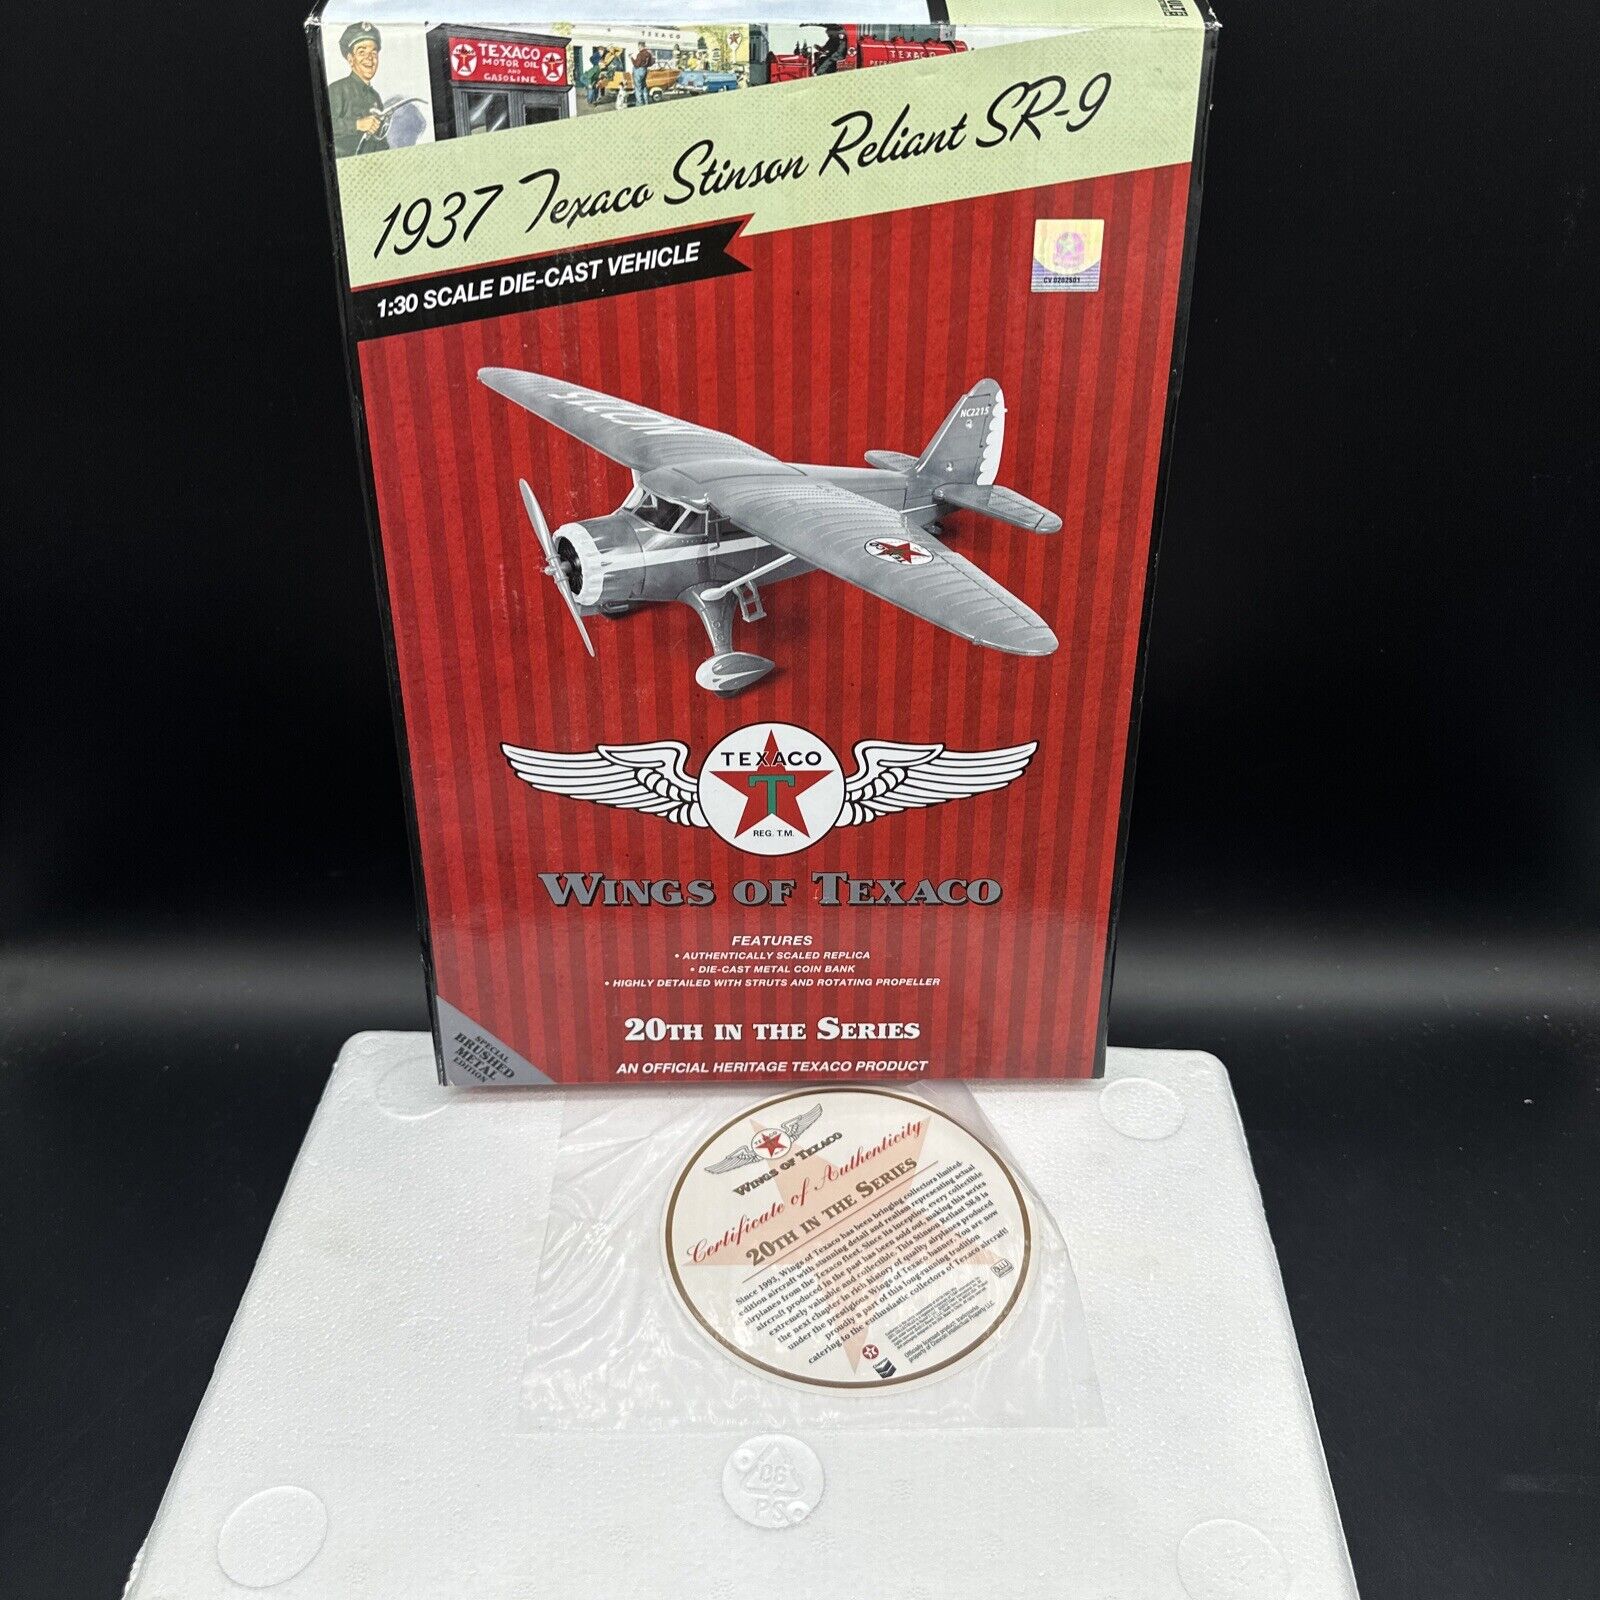 2012 Wings of Texaco Airplane #20 1937 STINSON RELIANT SR-9 SPECIAL EDITION NEW